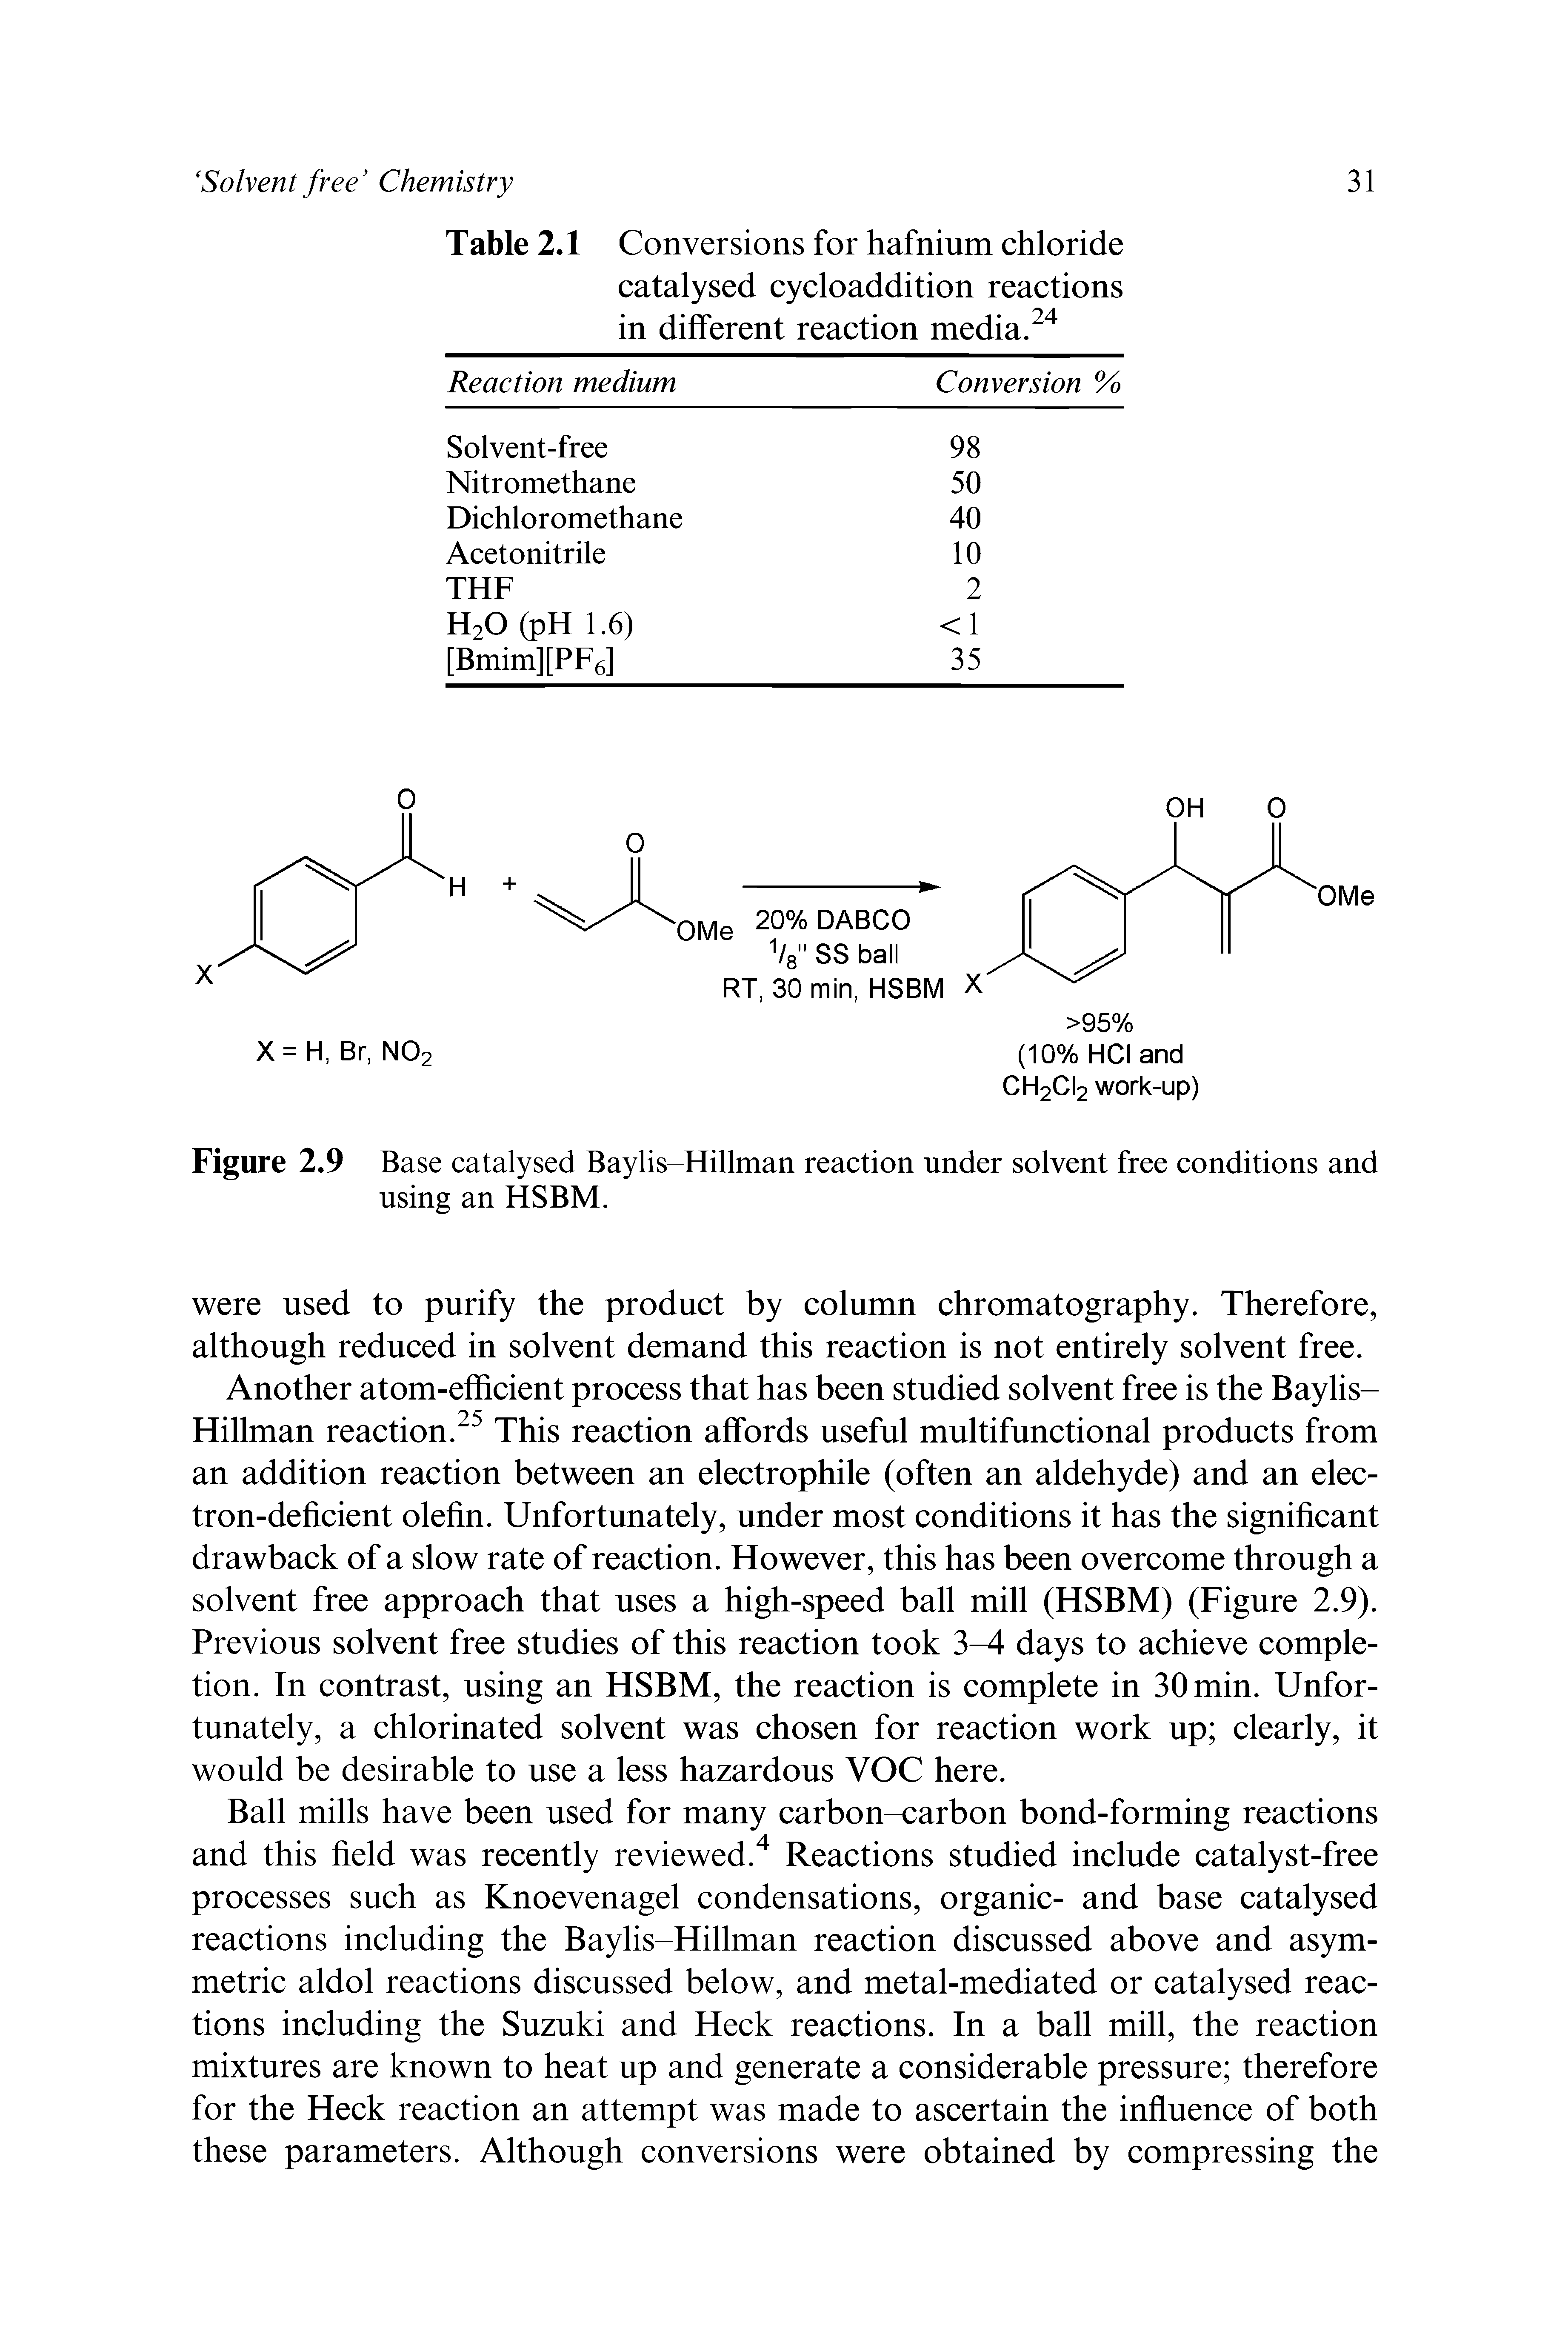 Figure 2.9 Base catalysed Baylis-Hillman reaction under solvent free conditions and using an HSBM.